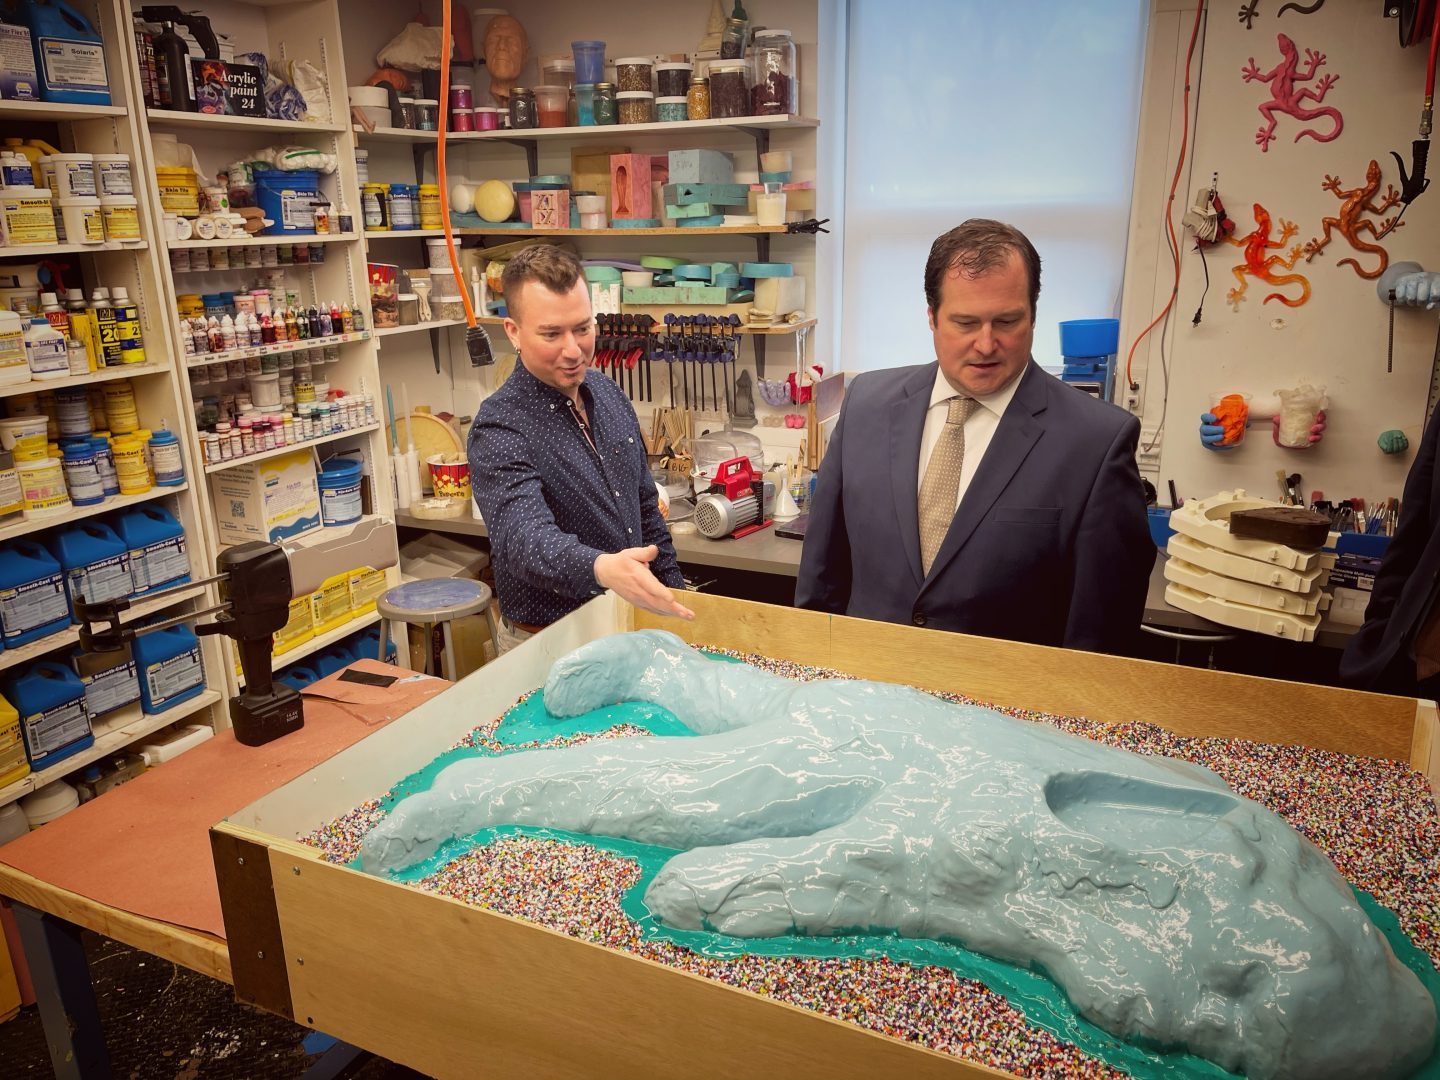 Pa. DCED Acting Secretary Neil Weaver (right) gets a tour of a work studio inside NCC’s ‘Fab Lab’ on April 7, 2022